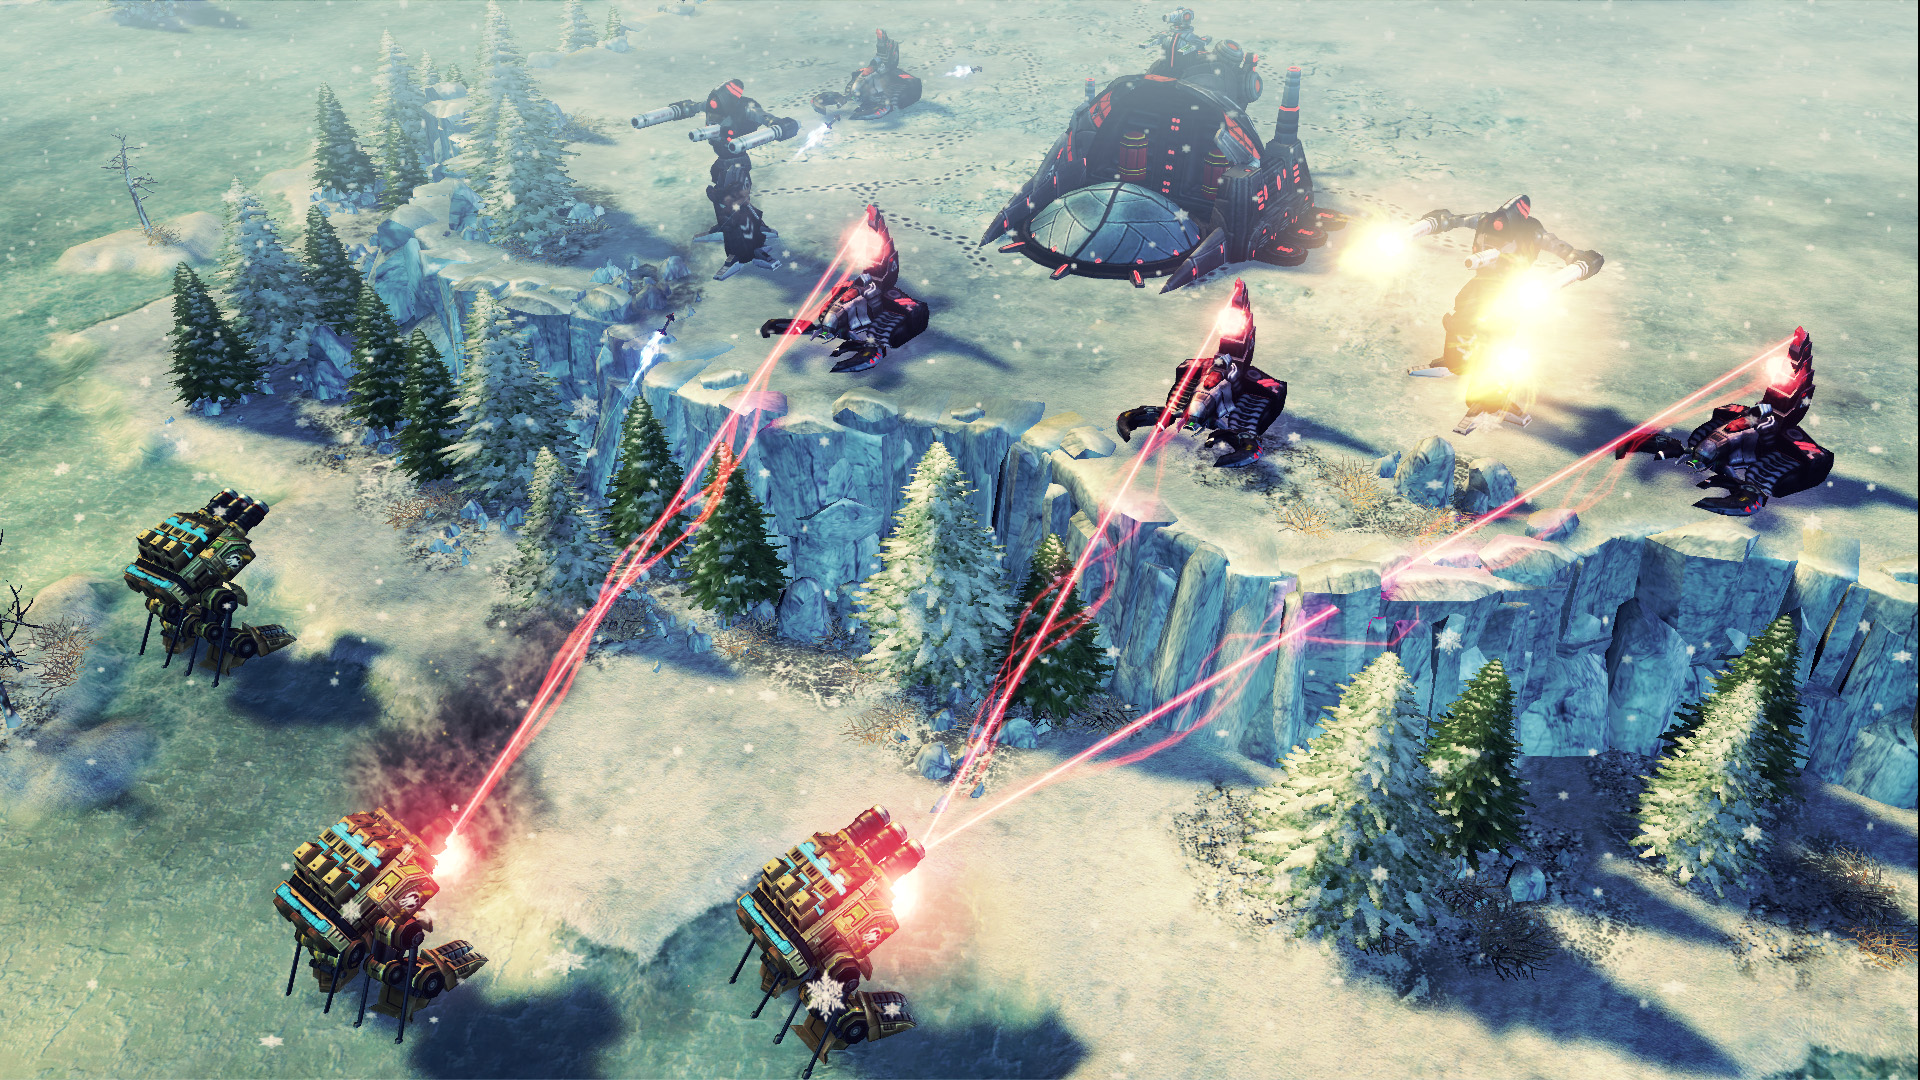 command and conquer 4 offline patch download